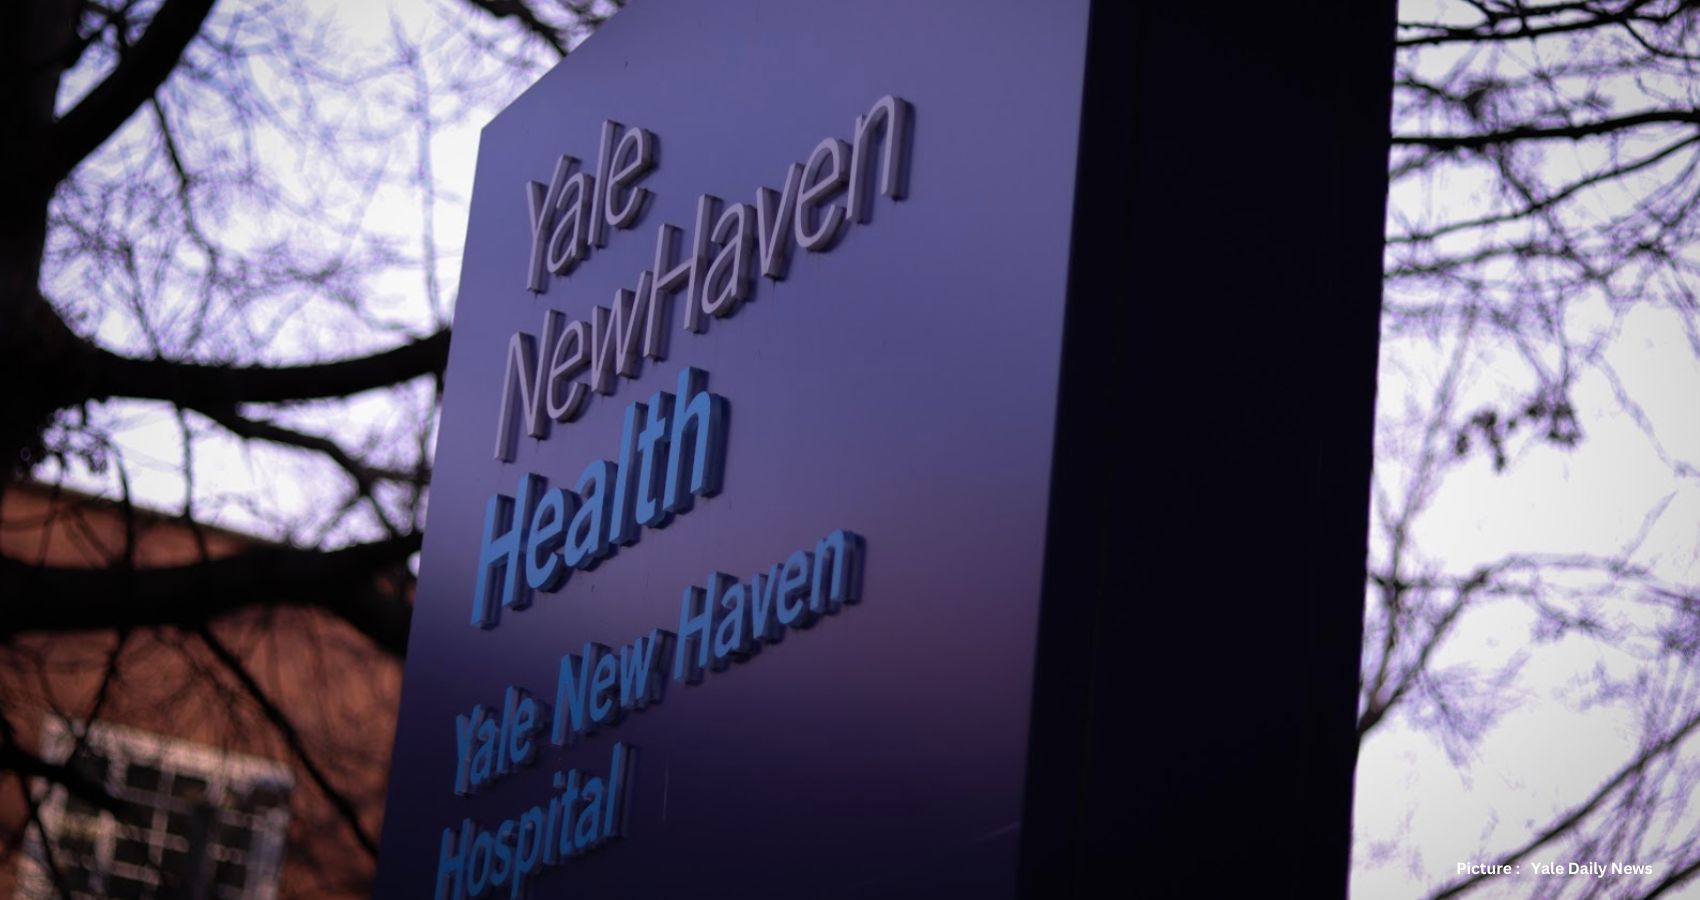 Yale New Haven Health Appoints Katherine Heilpern as President Amidst Leadership Transition and Ongoing Developments